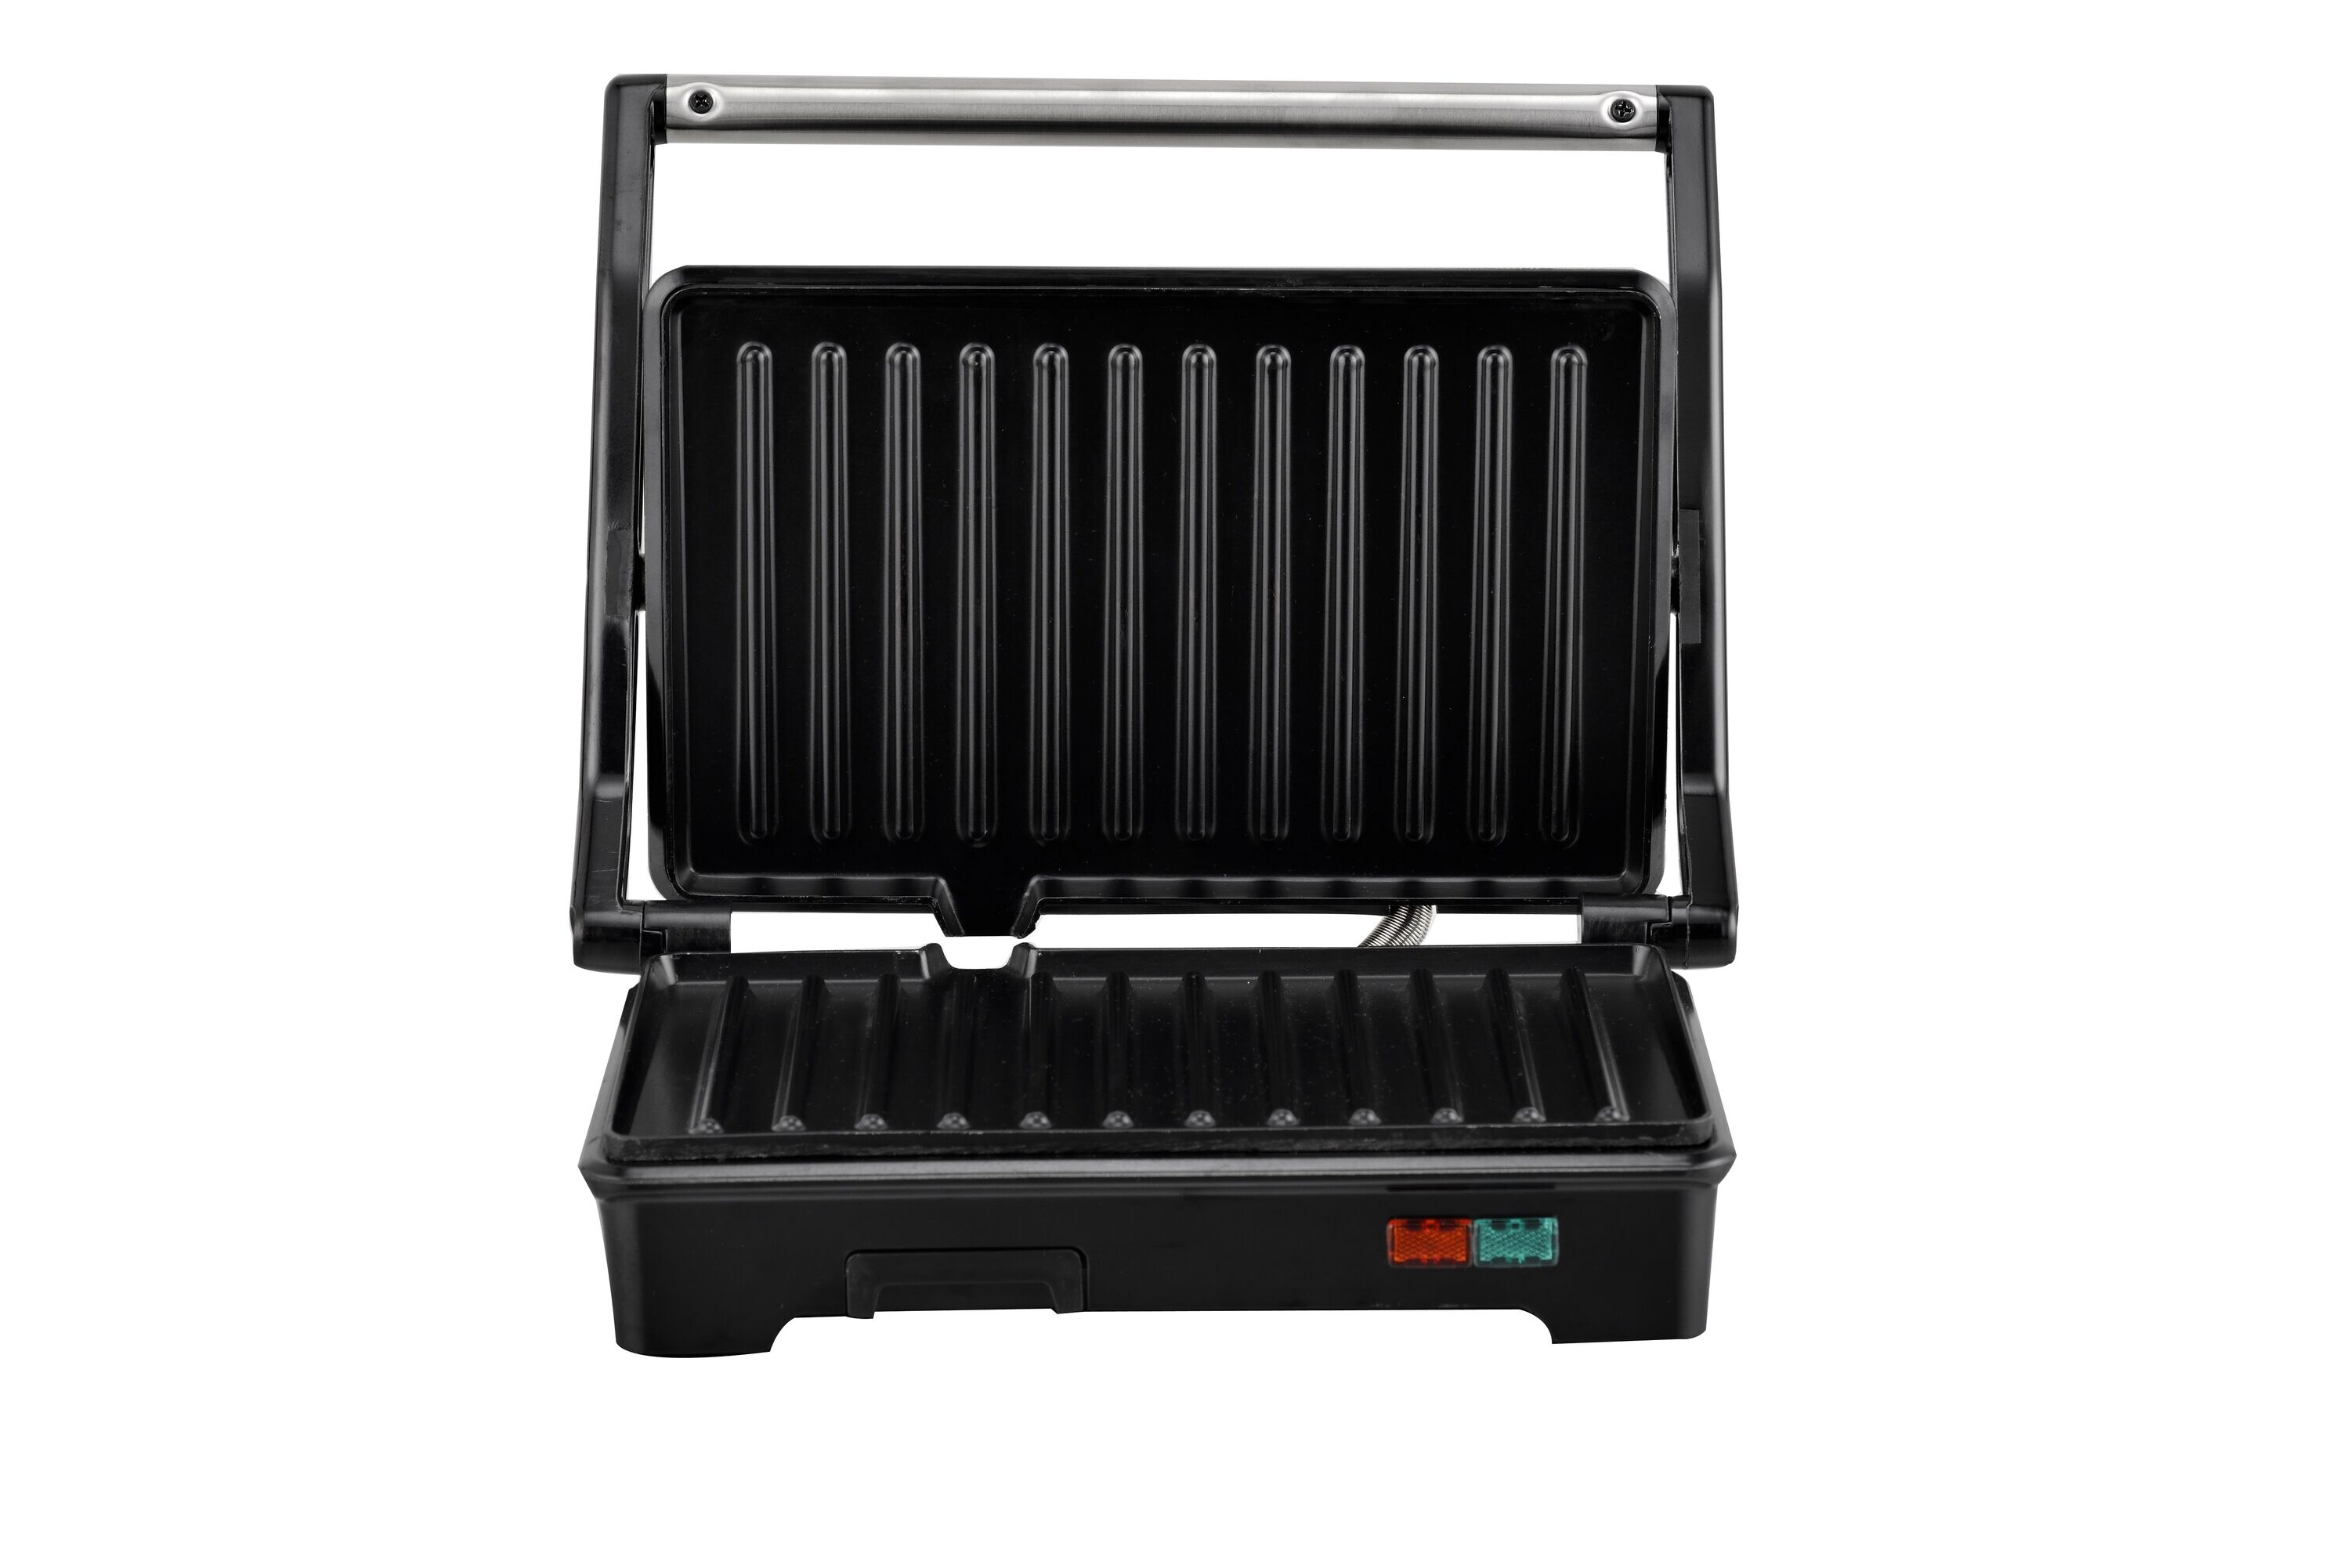 Lumme Stainless Steel Sandwich Maker - Panini Press with Floating